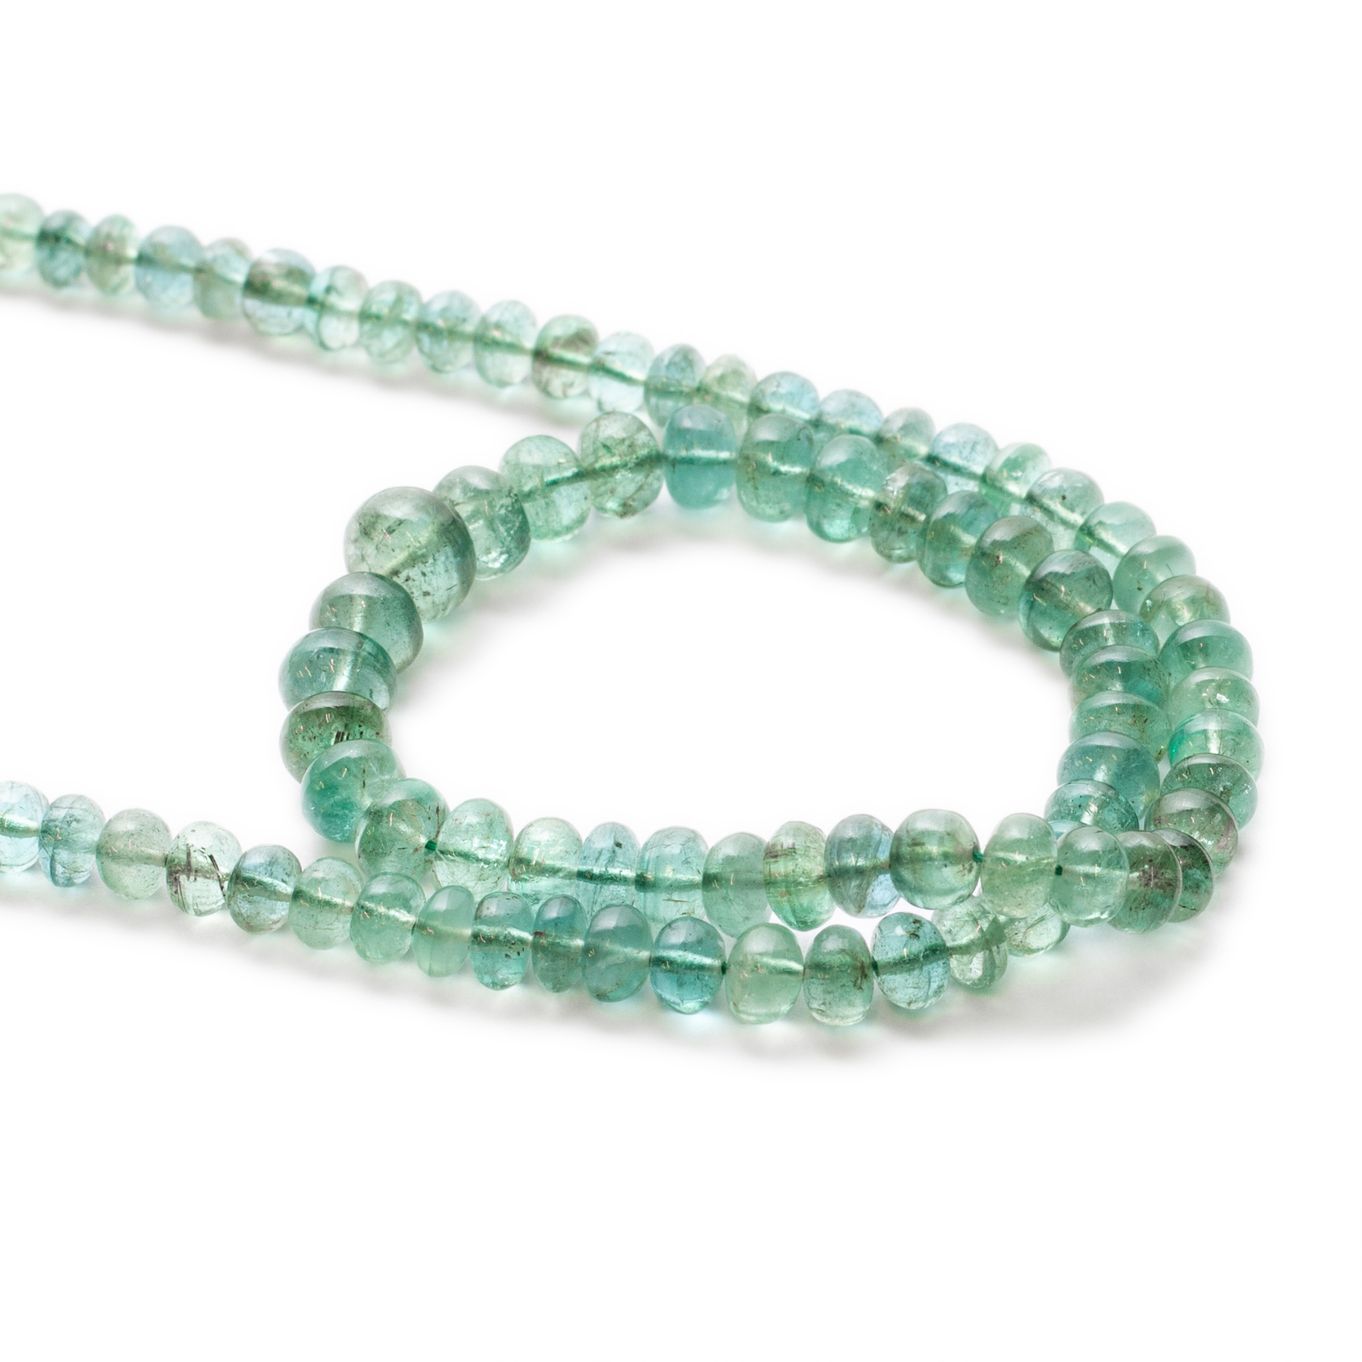 Emerald Rondelle Beads - Approx From 3mm